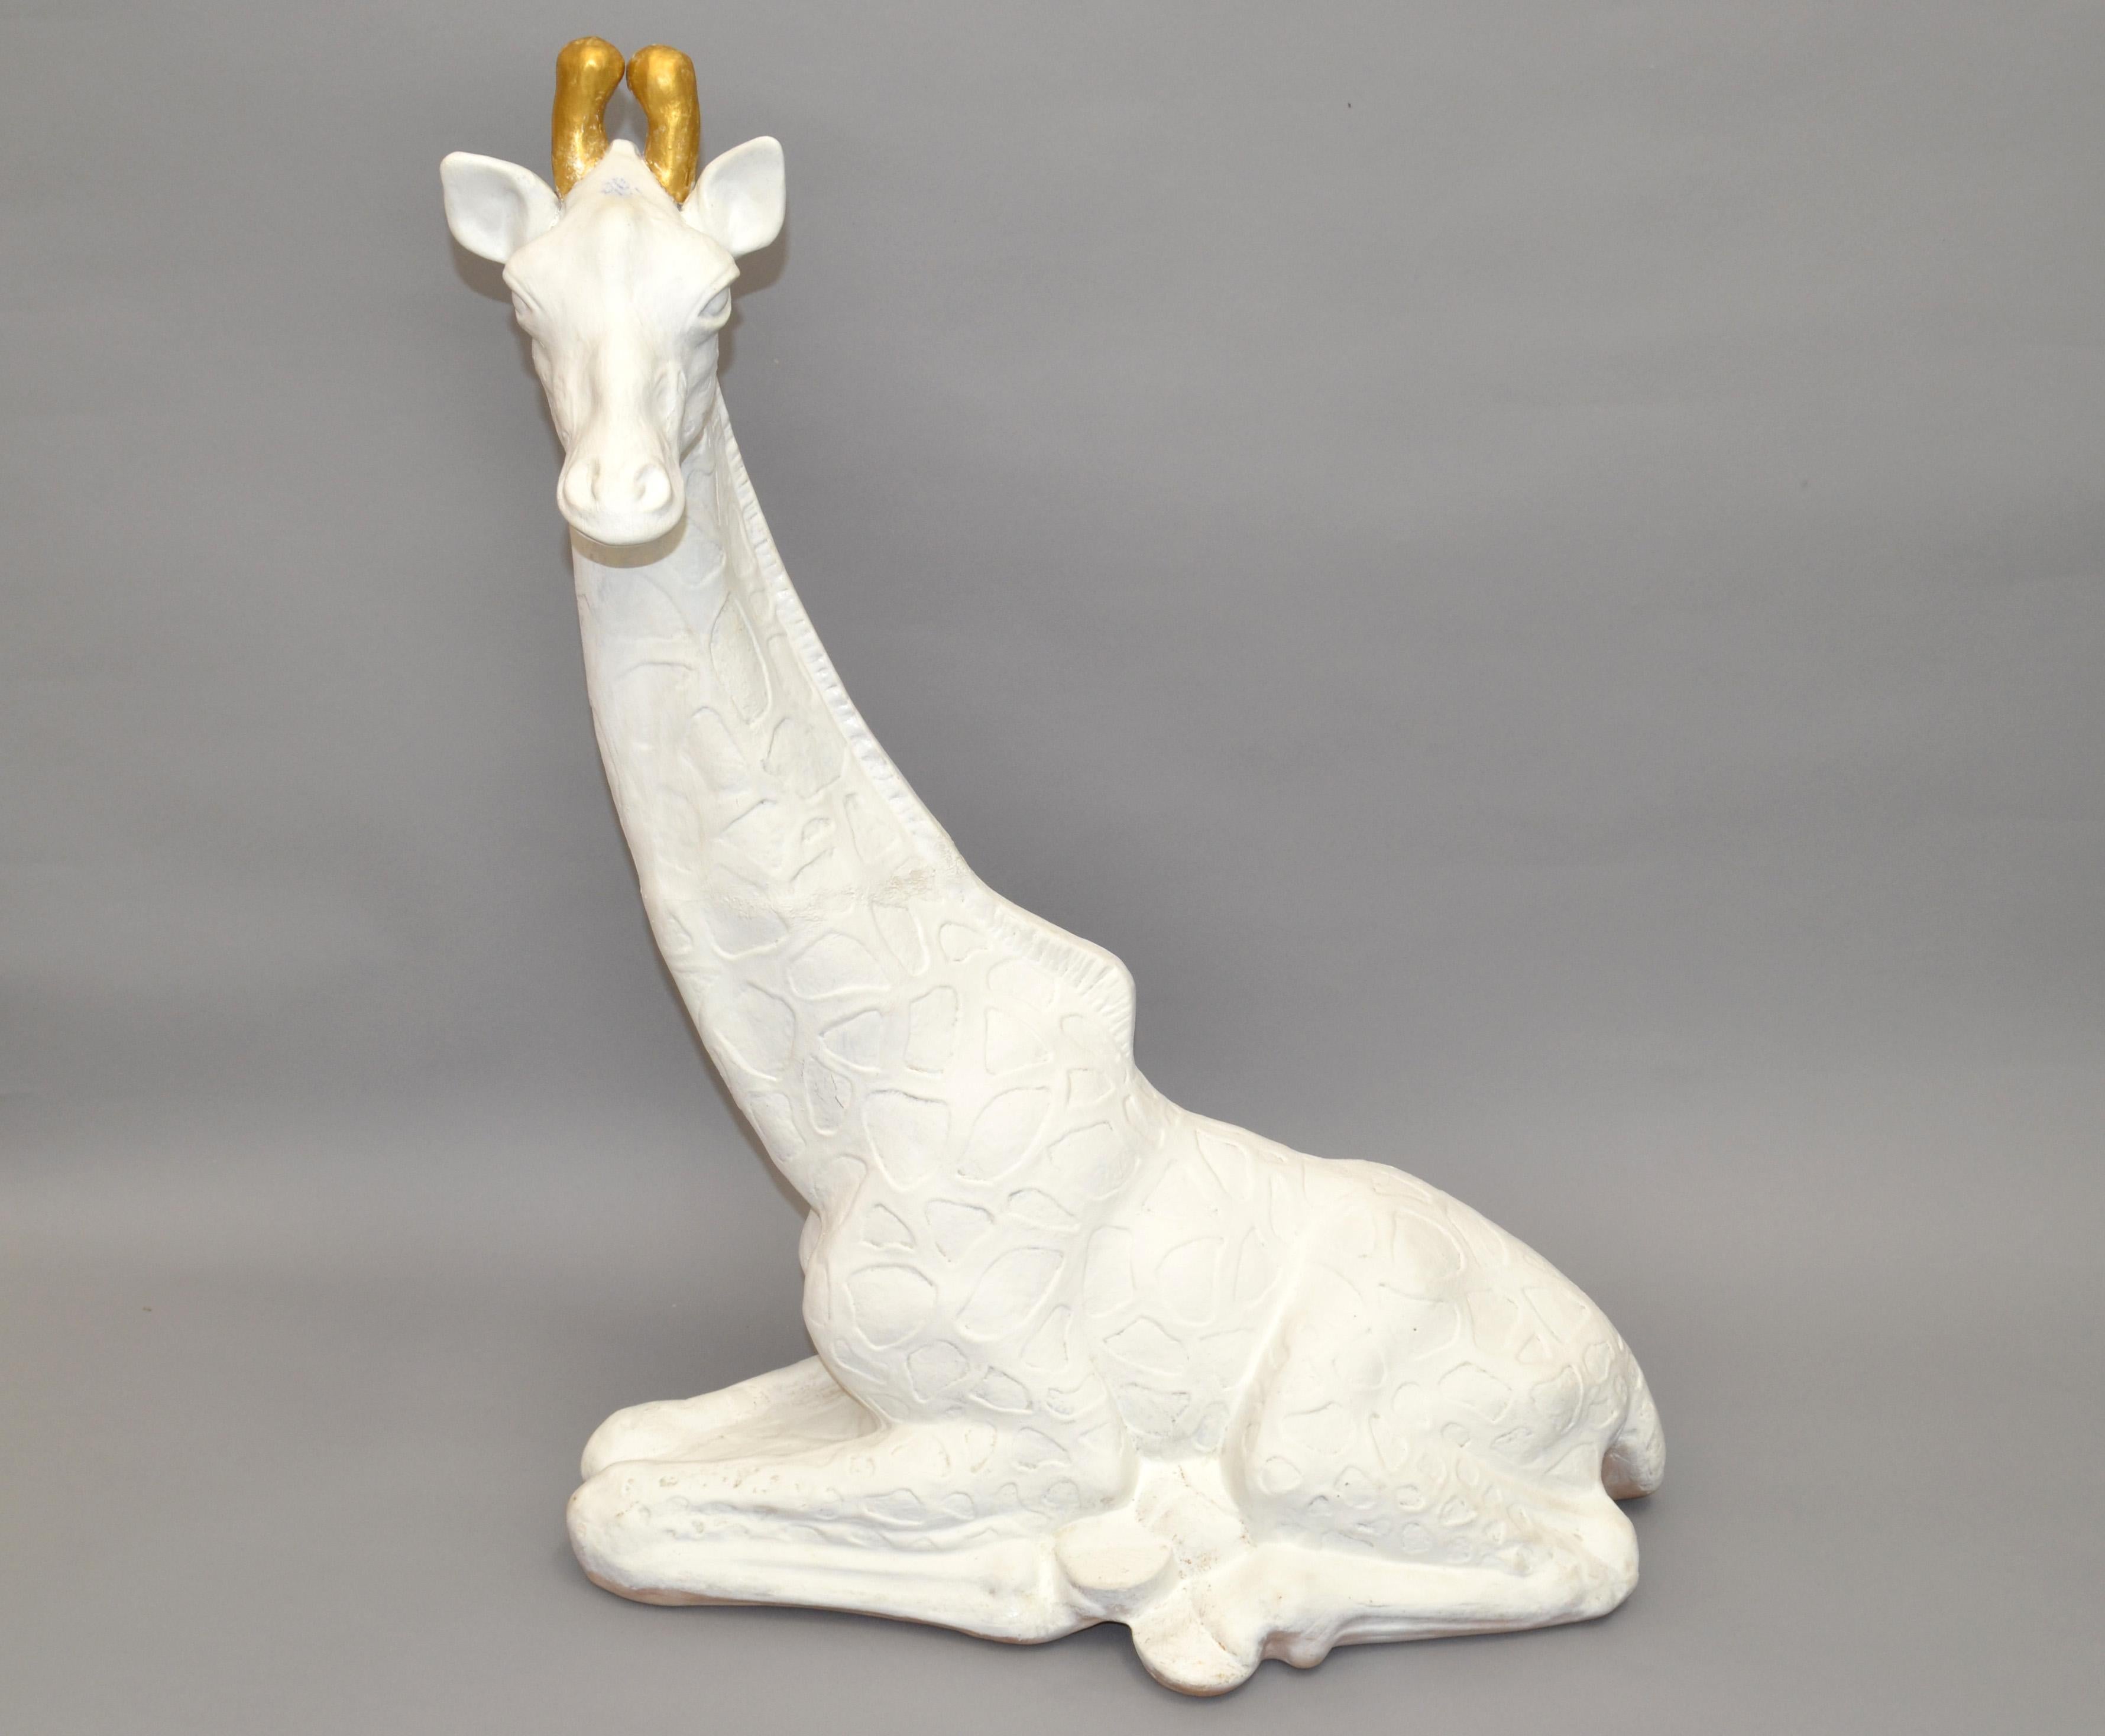 Resting Giraffe in Plaster with white Finish and gilt Ossicones (Horn like tusks), stunning Animal Sculpture.
Handmade in the 1980 and origin is America.
This is a beautiful piece of Mid-Century Modern artwork.